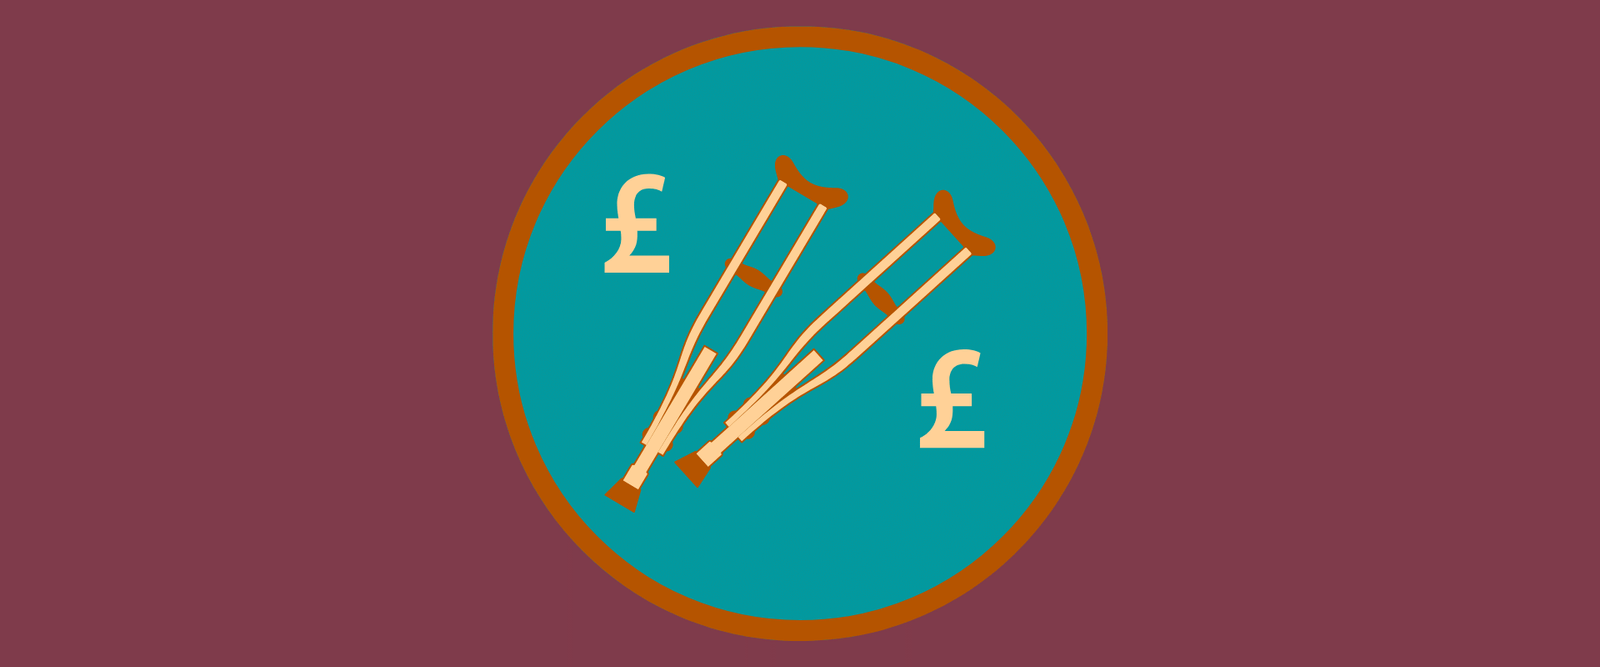 How Much Do Crutches Cost?